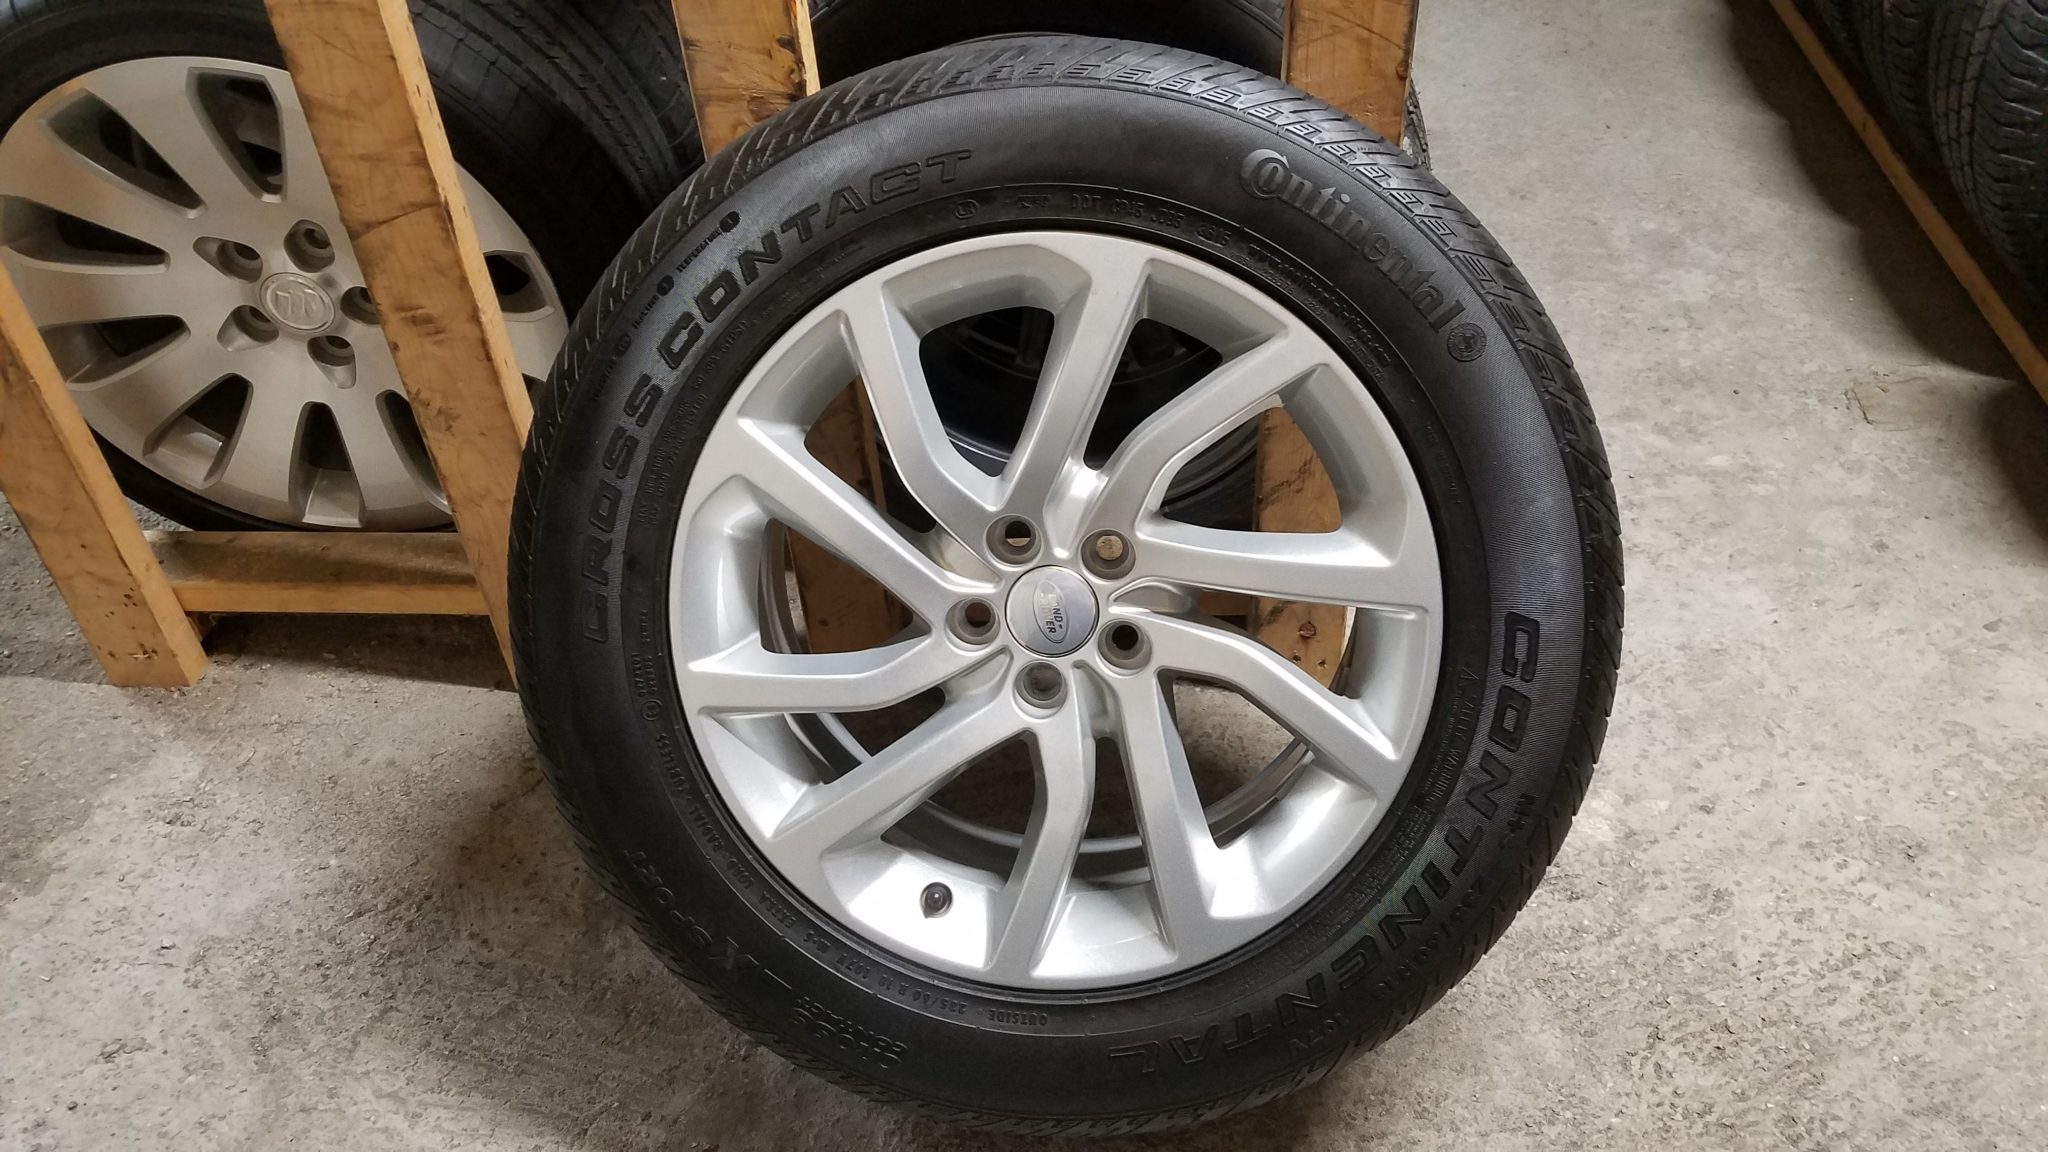 Single Land Rover Discovery Sport 2015 2016 2017 2018 18" OEM Rim Wheel Tire - AllOEMRims.com Tires For 2016 Land Rover Discovery Sport